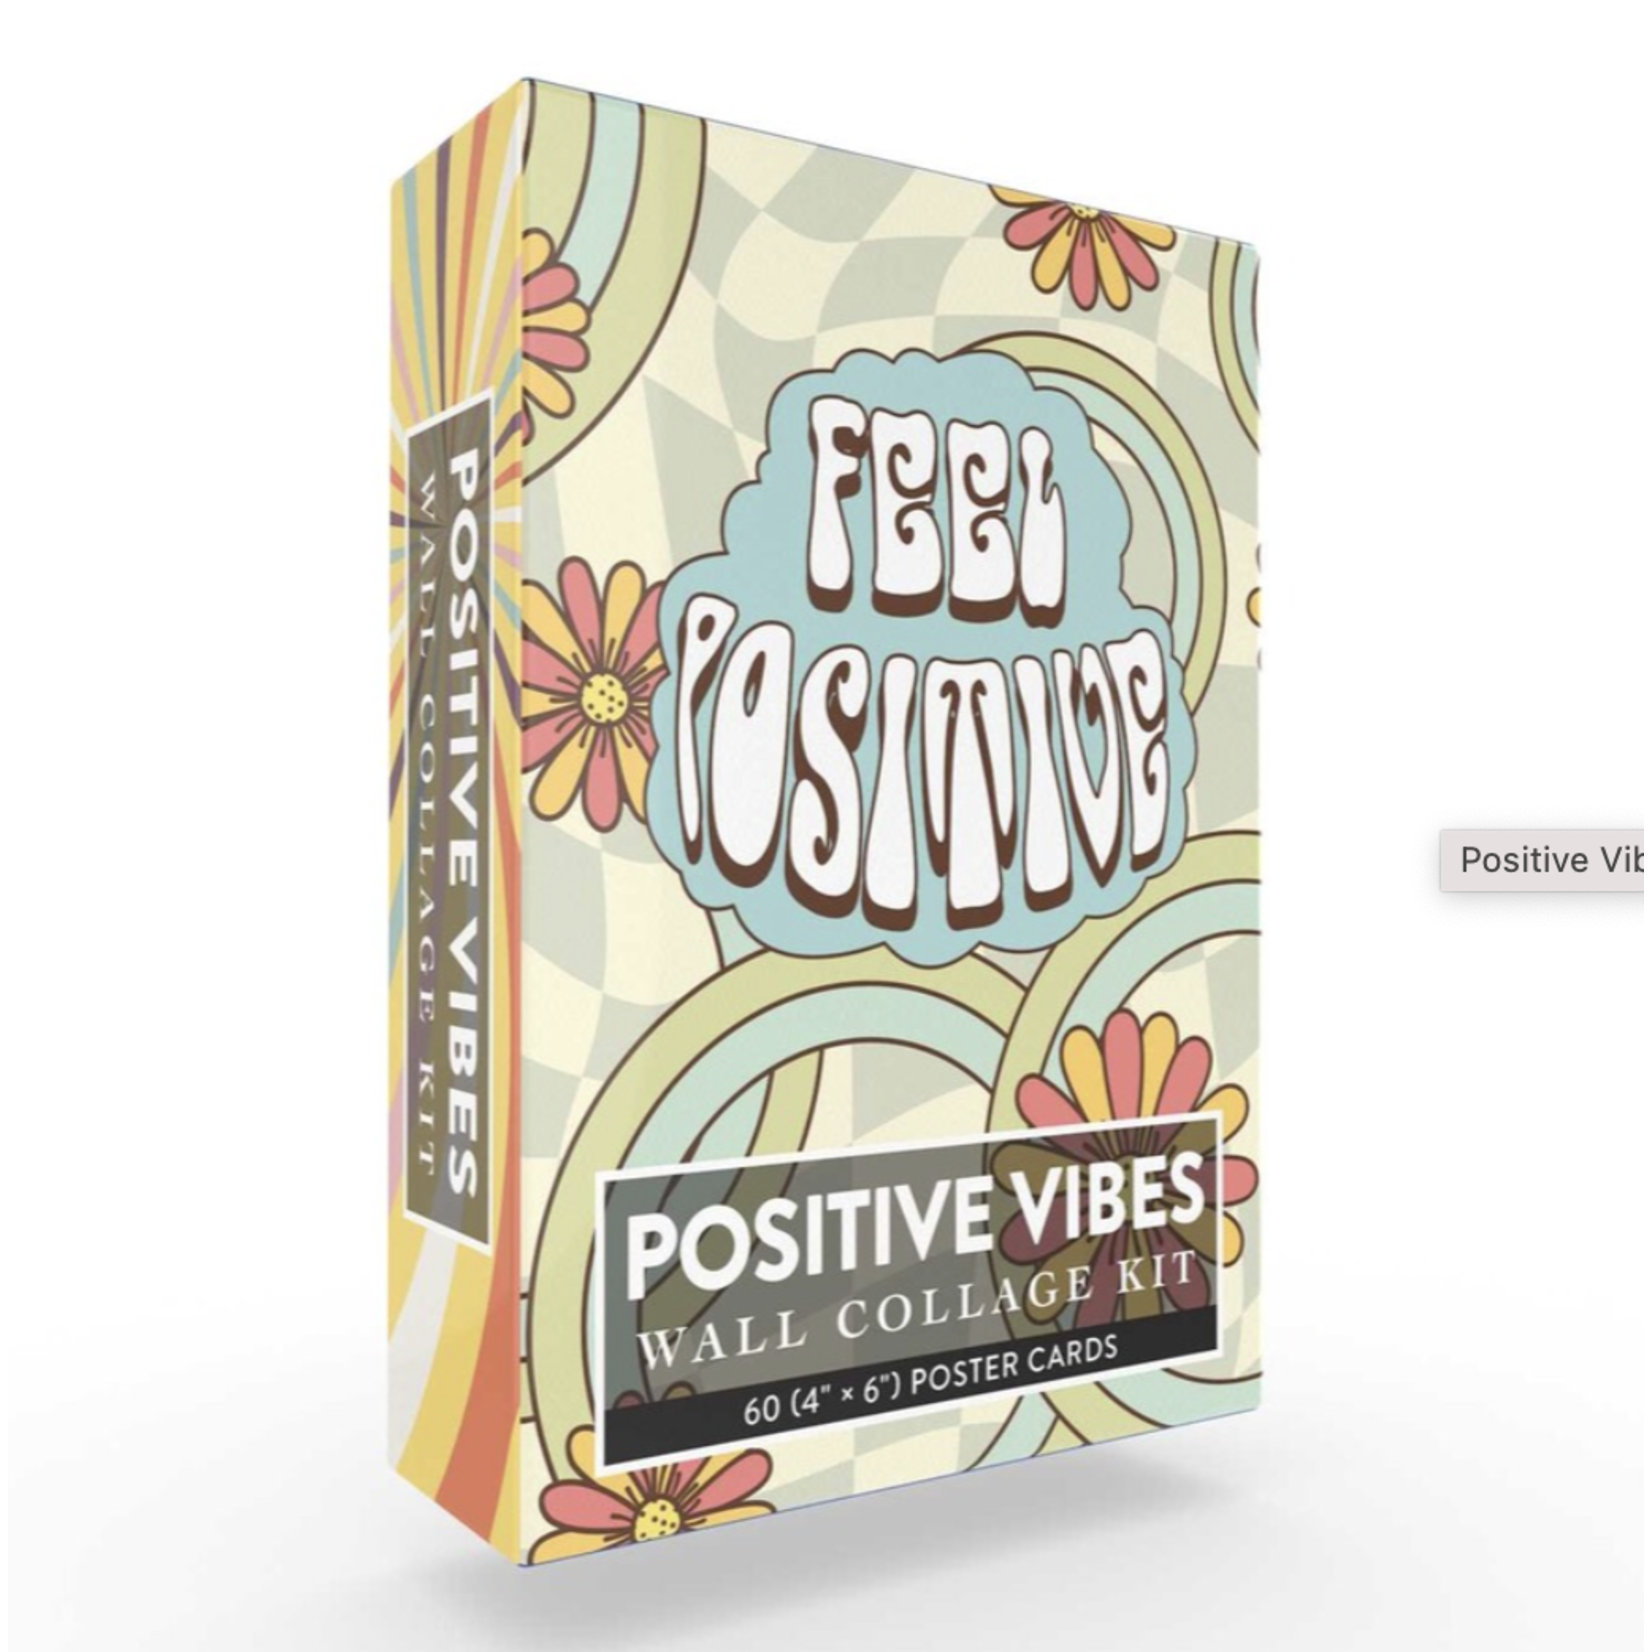 Simon & Schuster POSITIVE VIBES WALL COLLAGE KIT